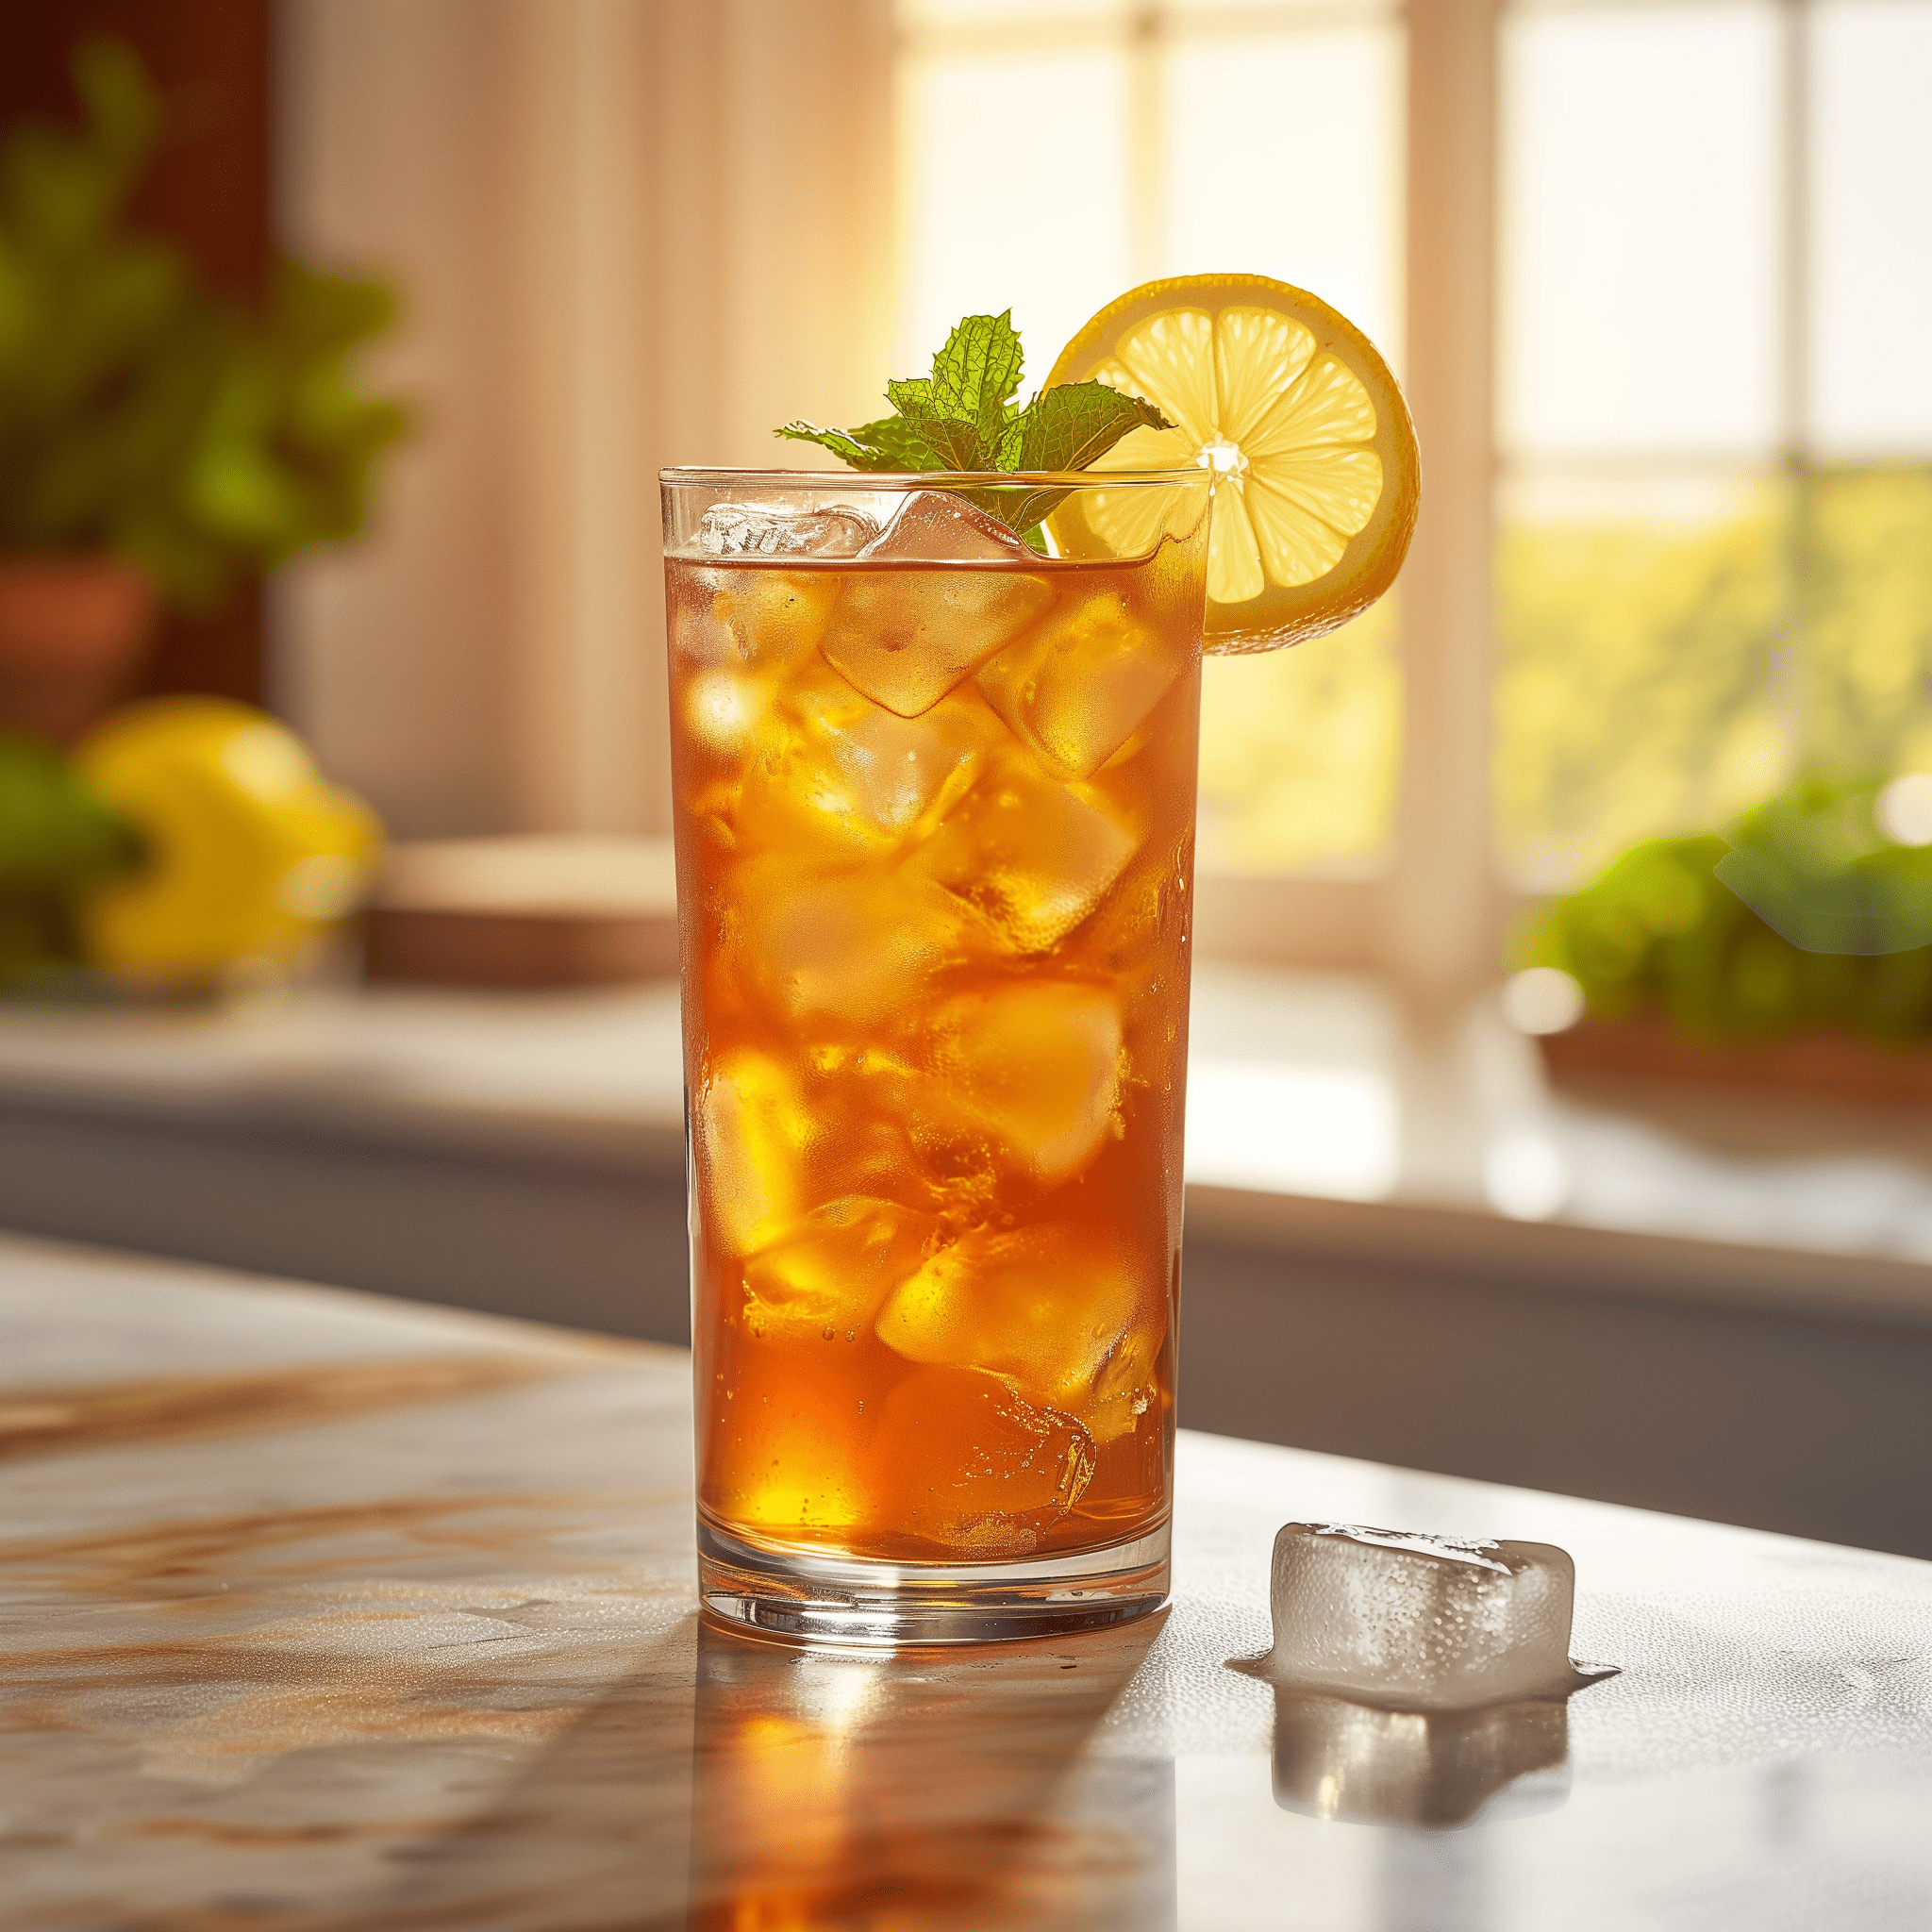 Non-Alcoholic Long Island Iced Tea Recipe - The Non-Alcoholic Long Island Iced Tea has a complex, layered taste that is sweet, tangy, and slightly bitter, closely resembling the flavor profile of its alcoholic counterpart. The combination of tea, citrus, and cola flavors creates a refreshing and satisfying drink.